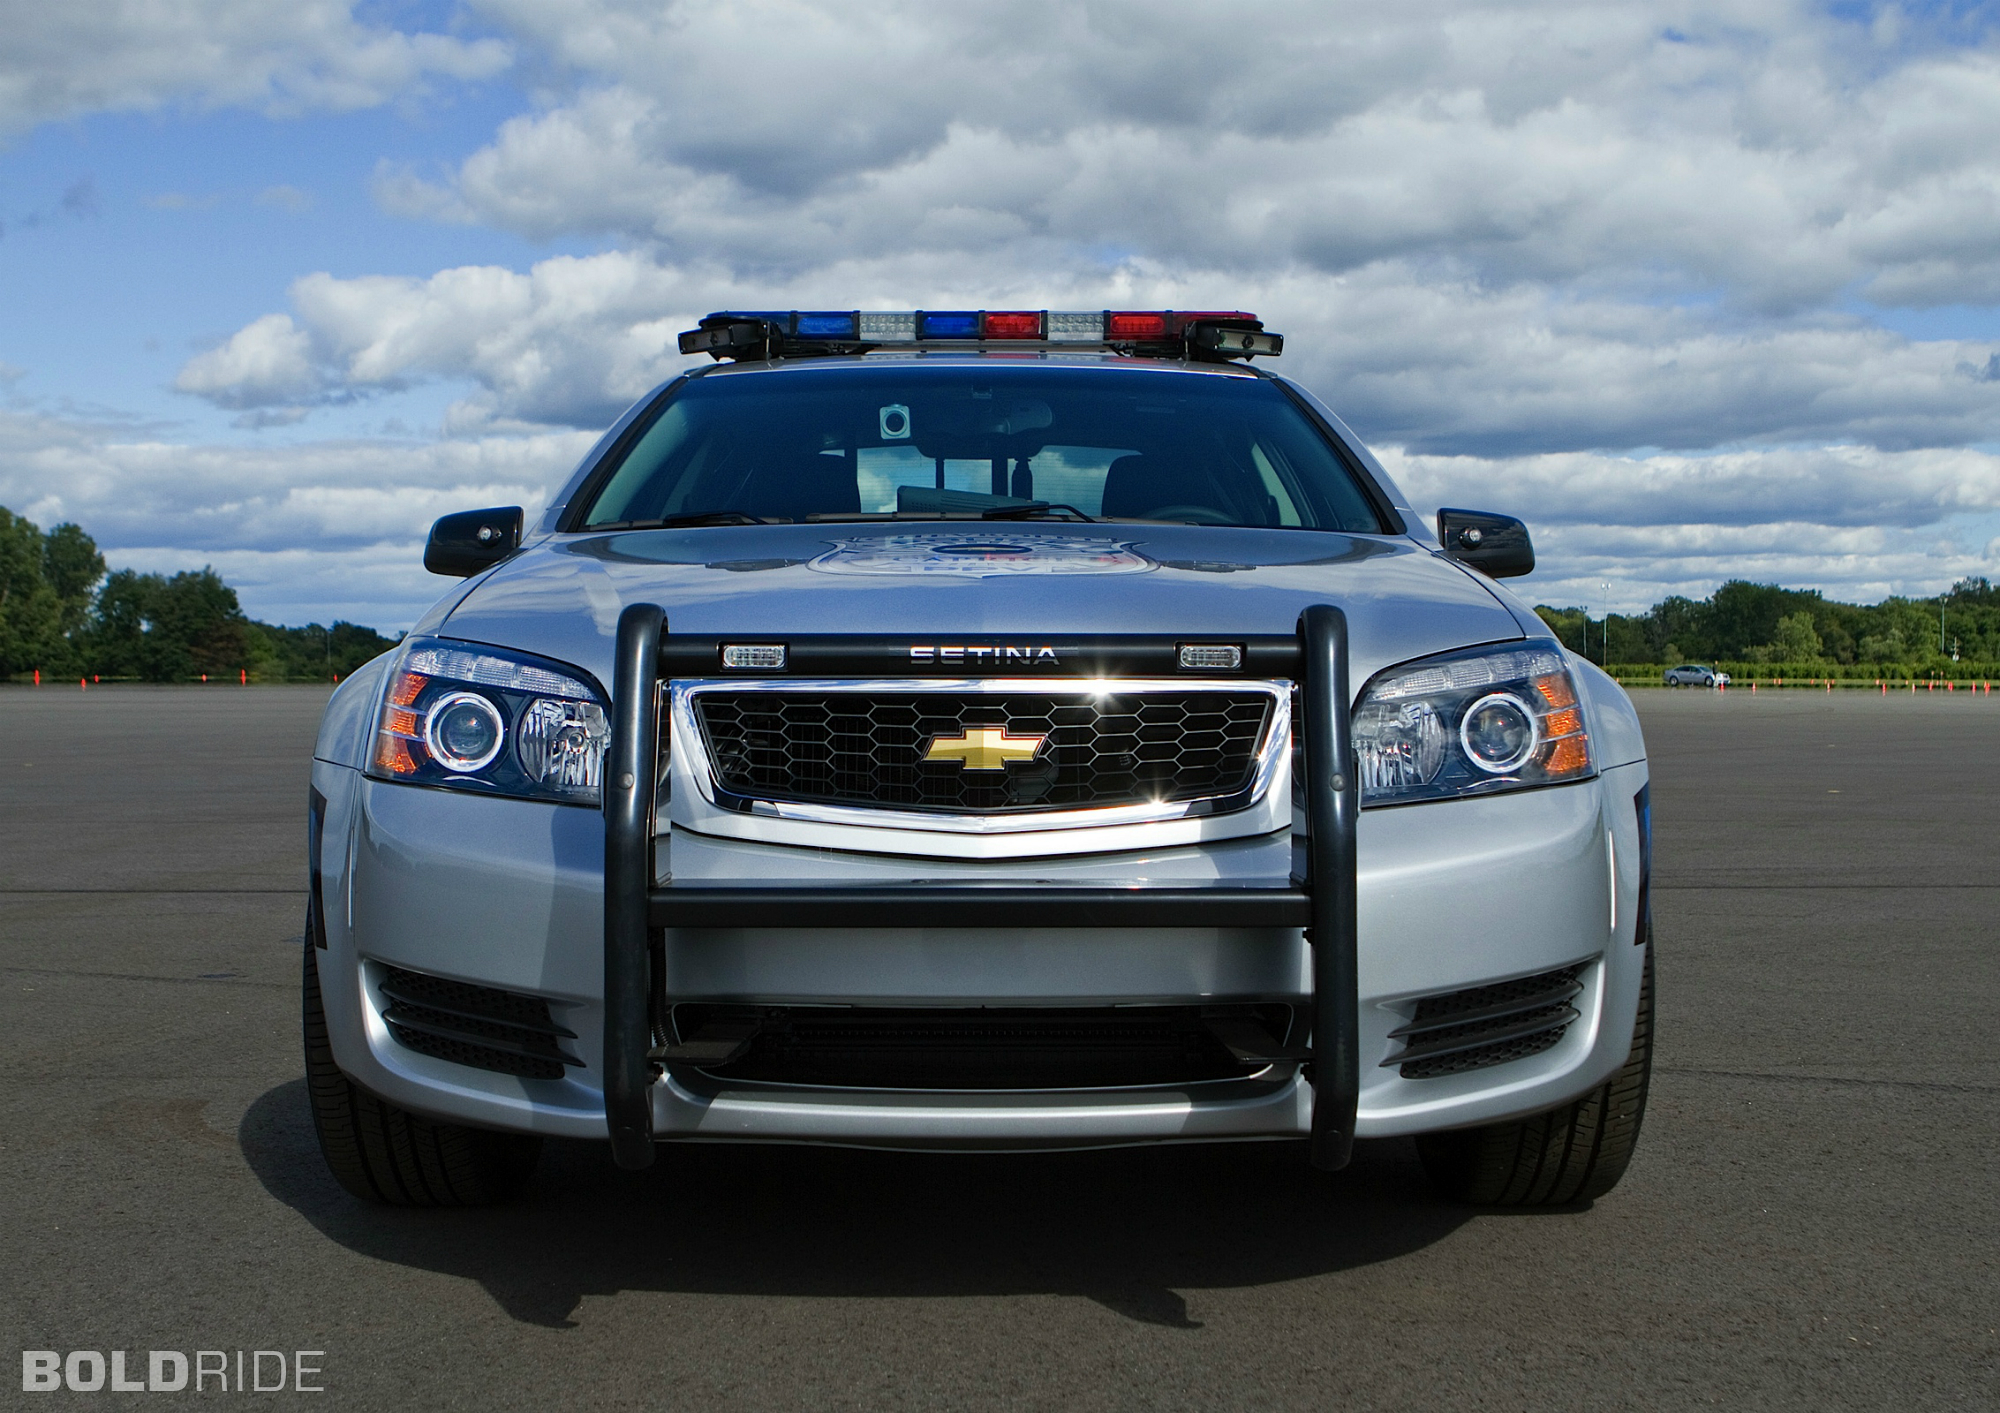 2012, Chevrolet, Caprice, Police, Muscle Wallpaper